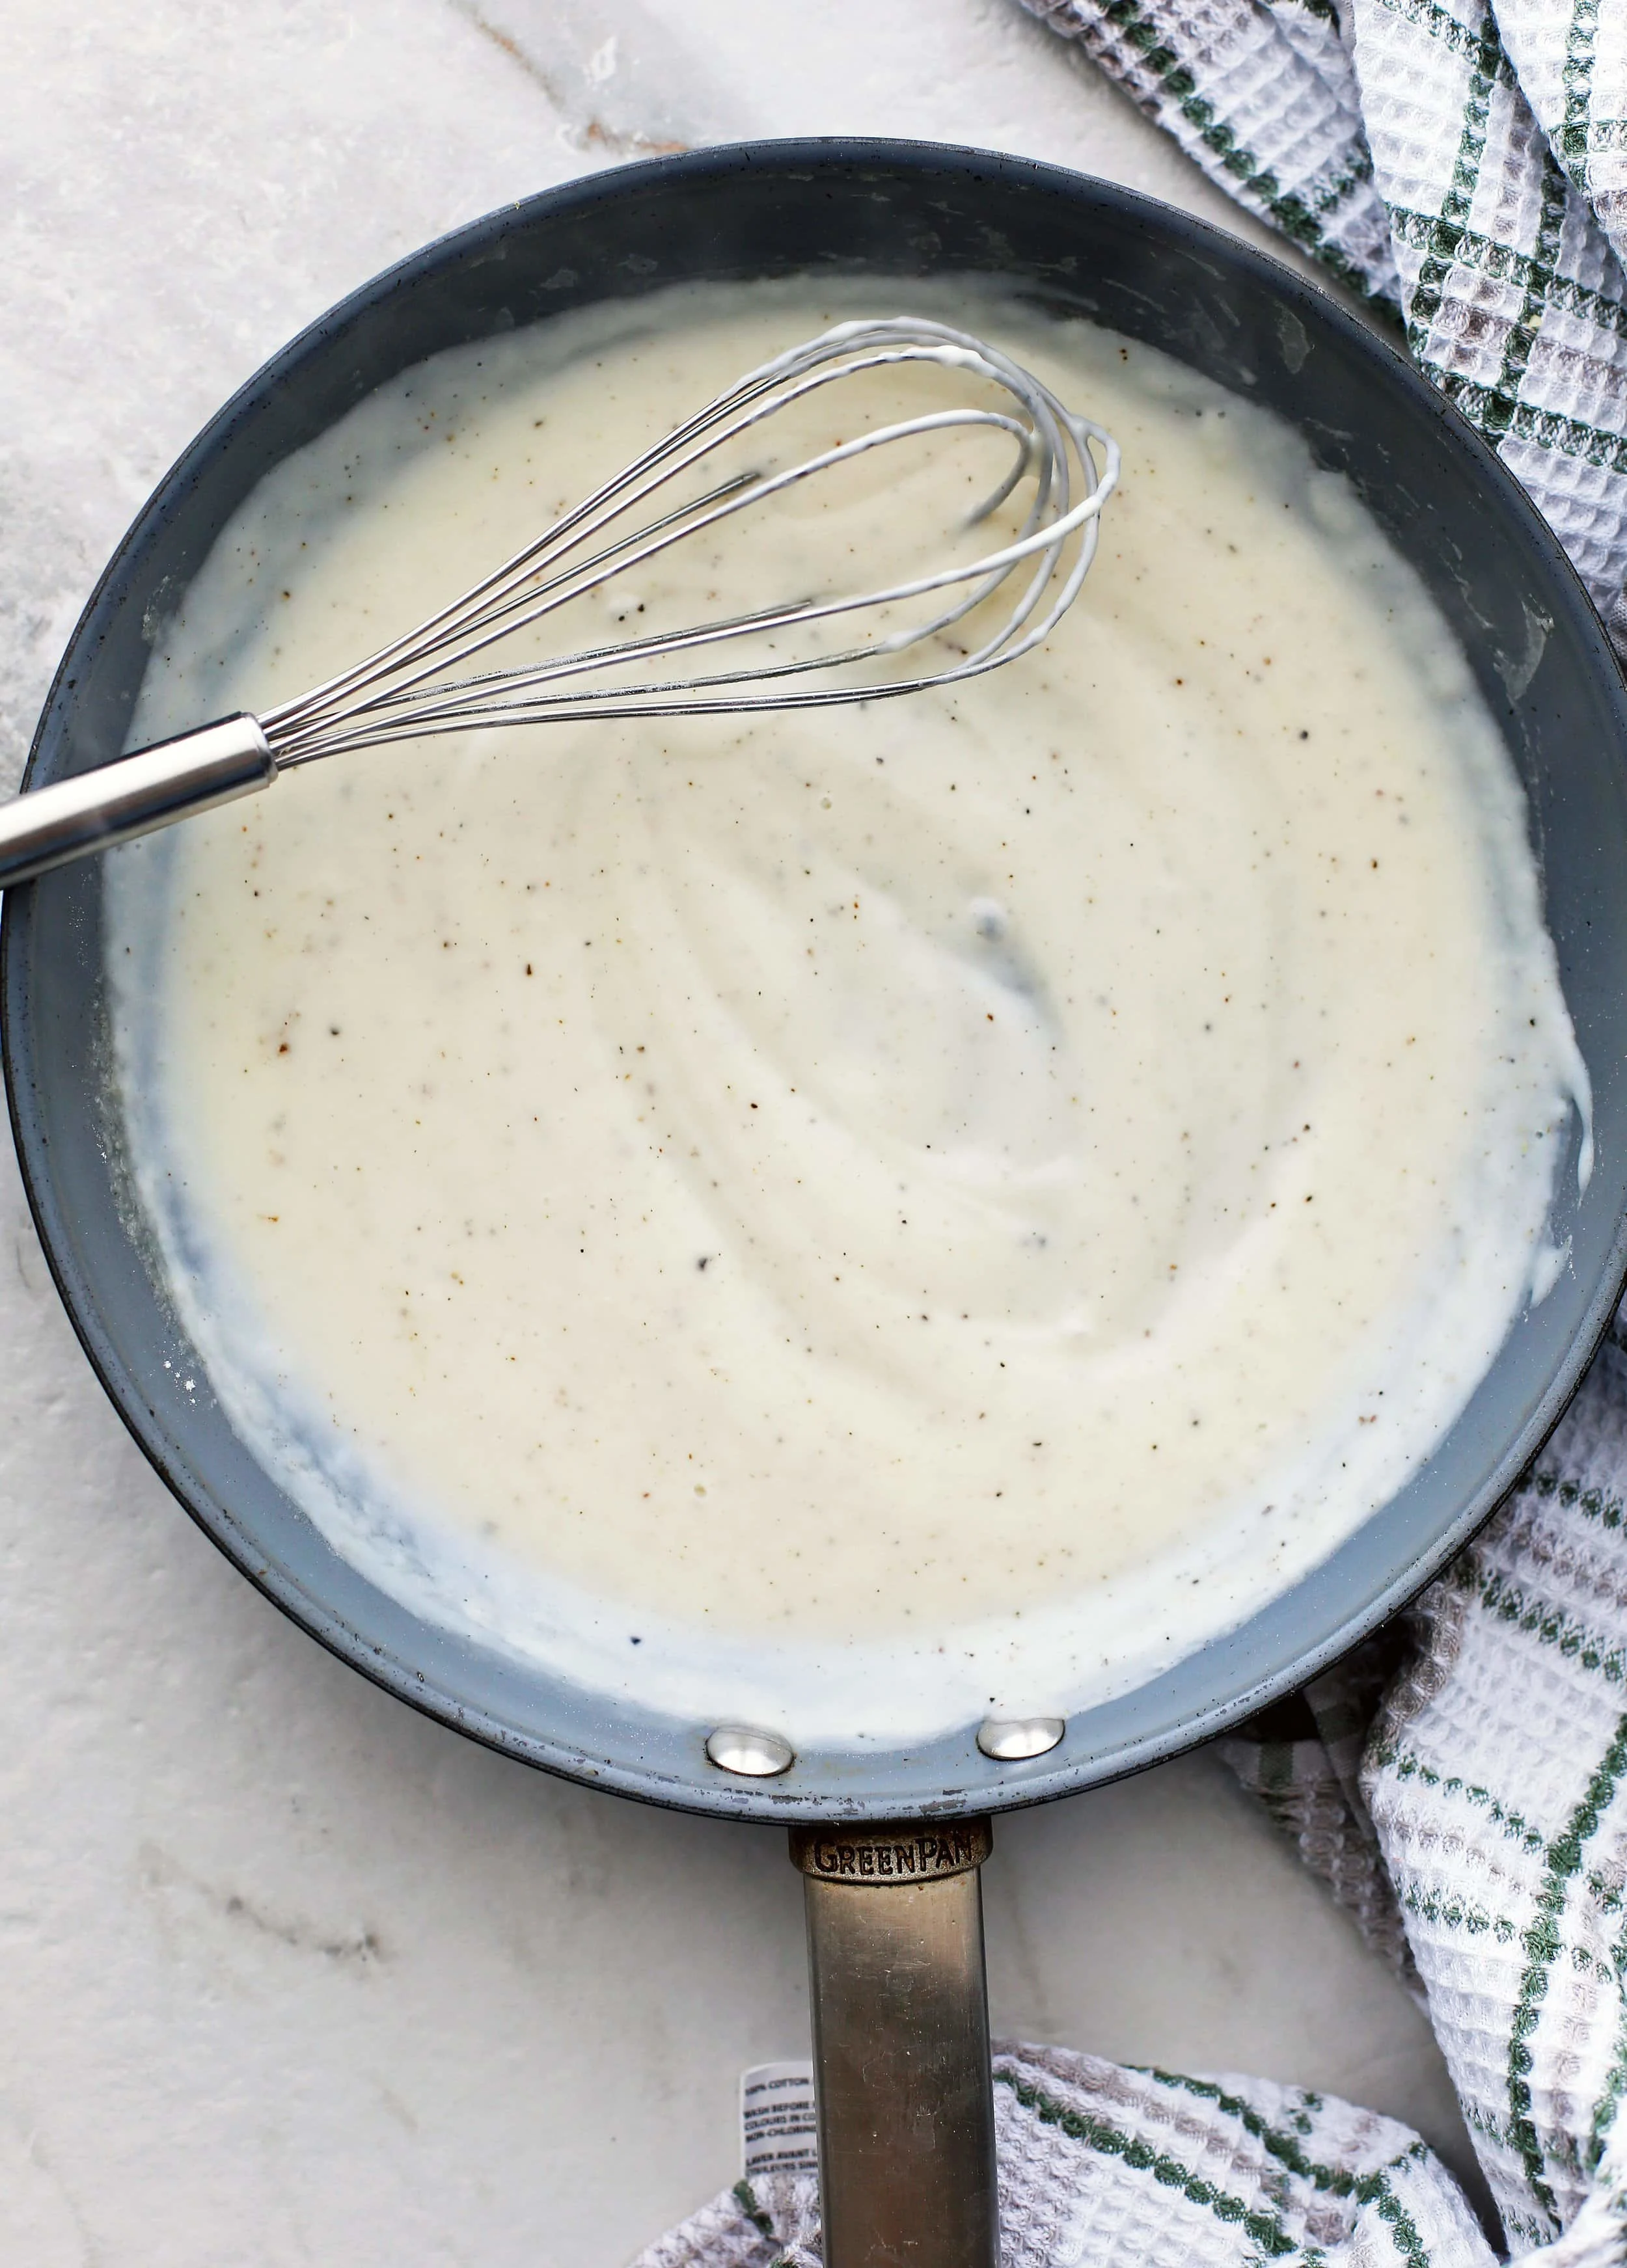 White sauce also known as béchamel sauce in skillet with a metal wired whisk.